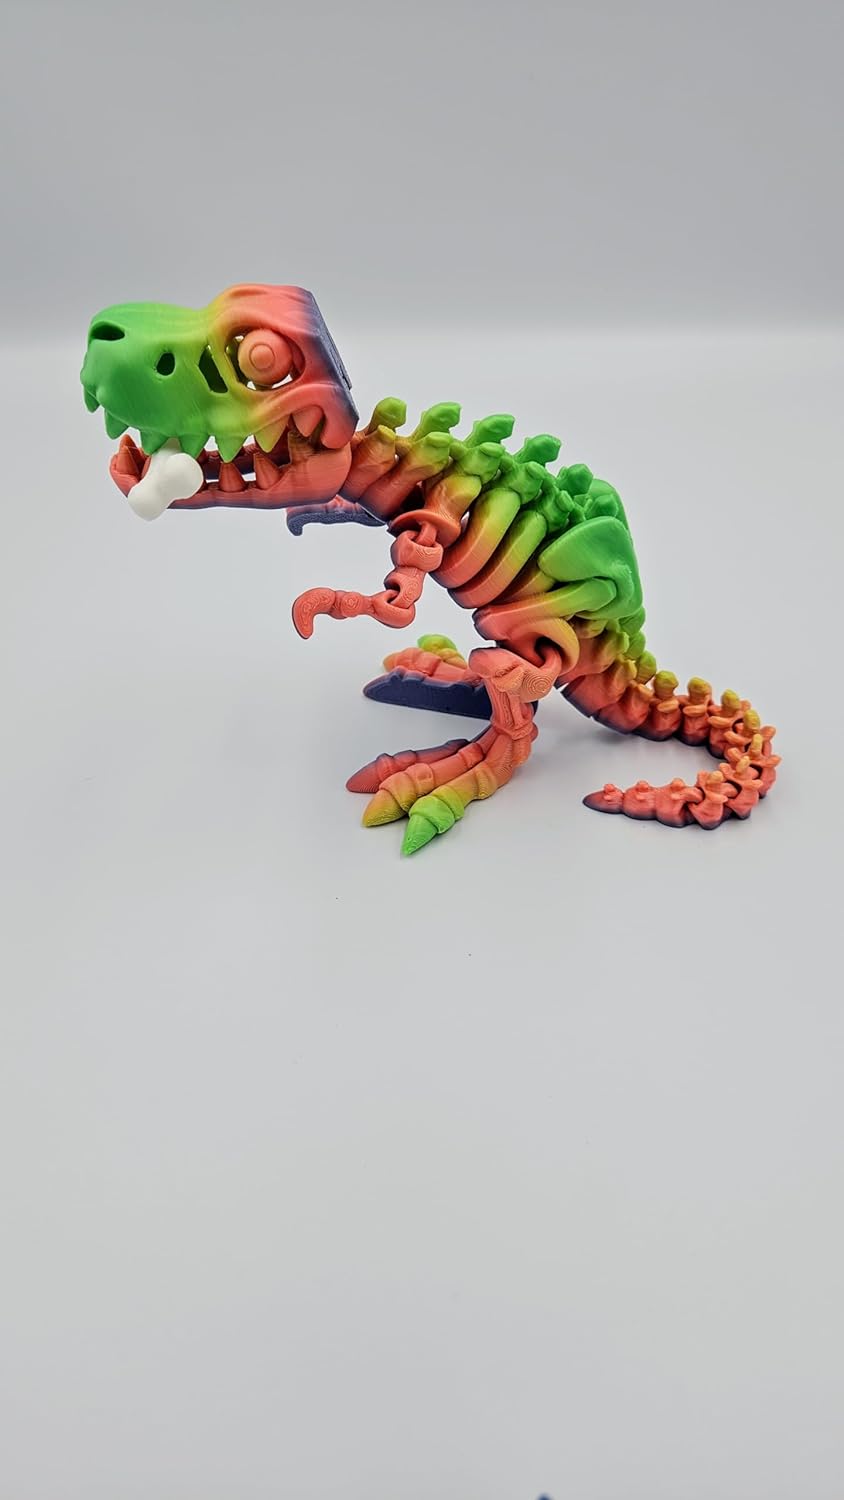 Flexible Rexi with Bone 3D Printed Articulated Toys for ADHD, Autism, Stress and Anxiety Relief